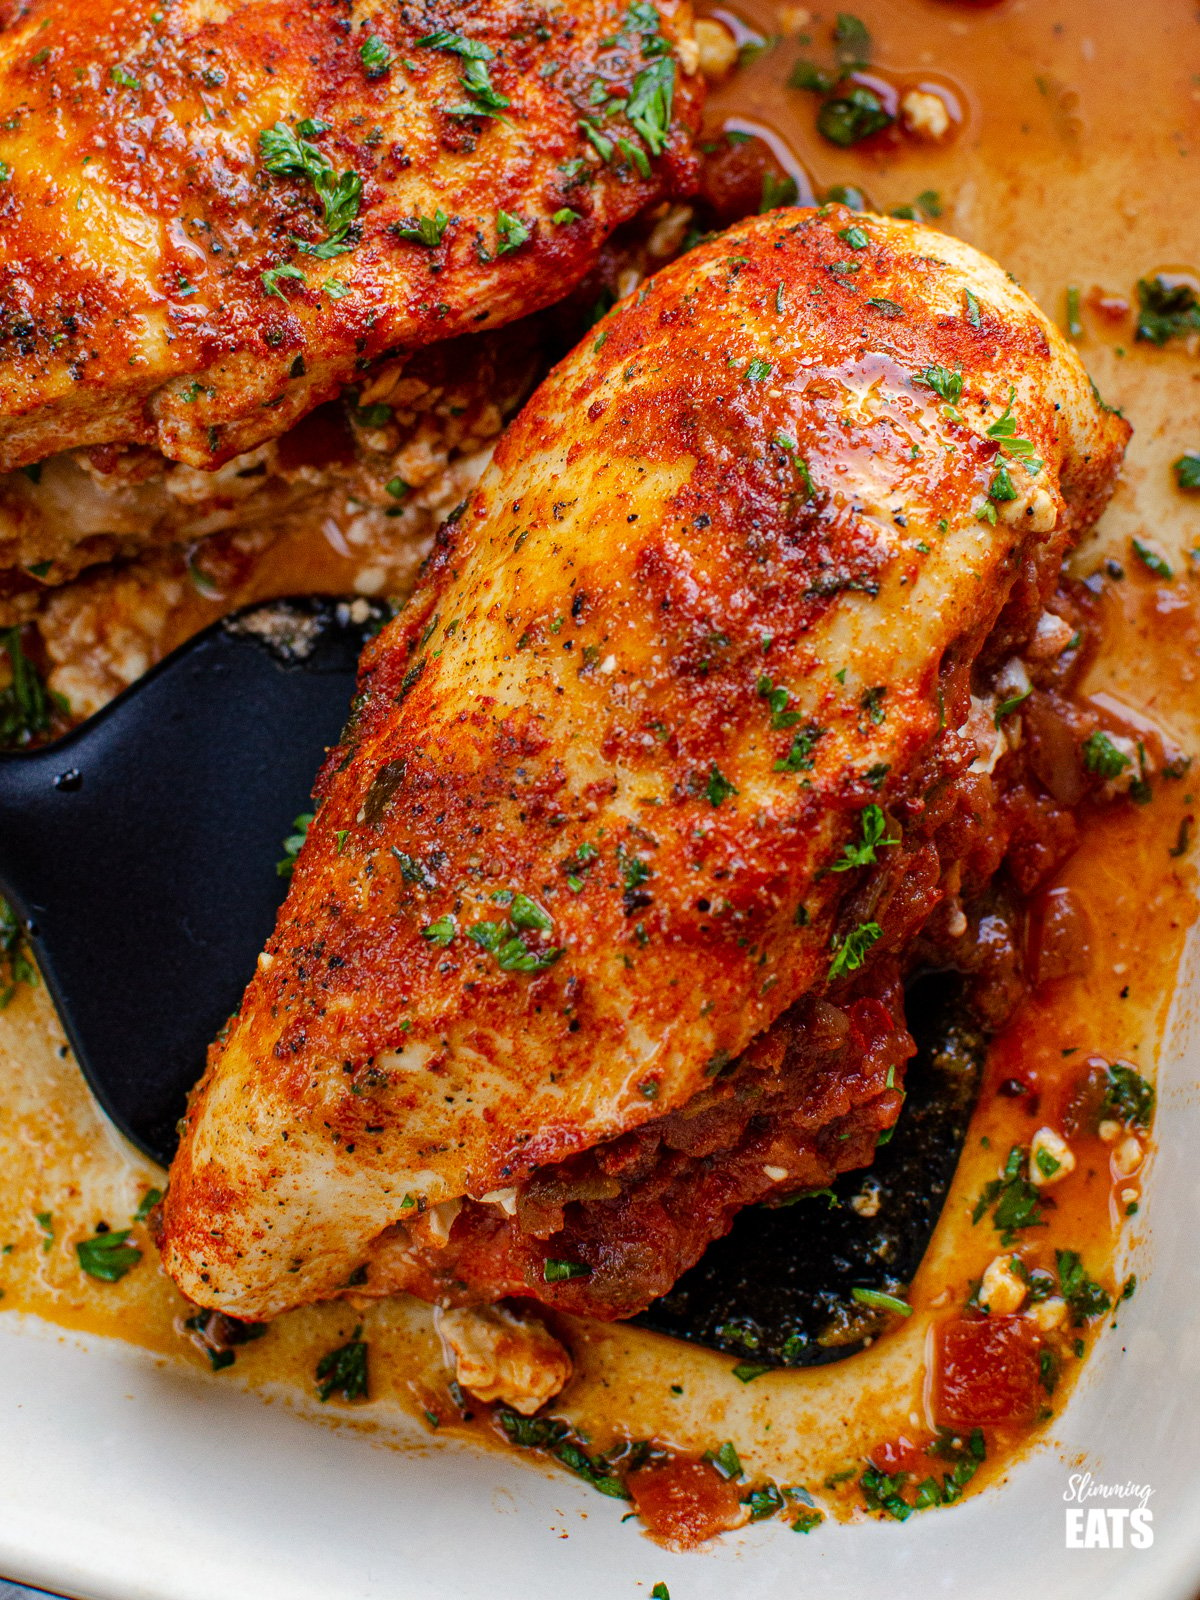 Spicy Chicken Stuffed with Feta Cheese and Salsa Slimming Eats - Weight ...